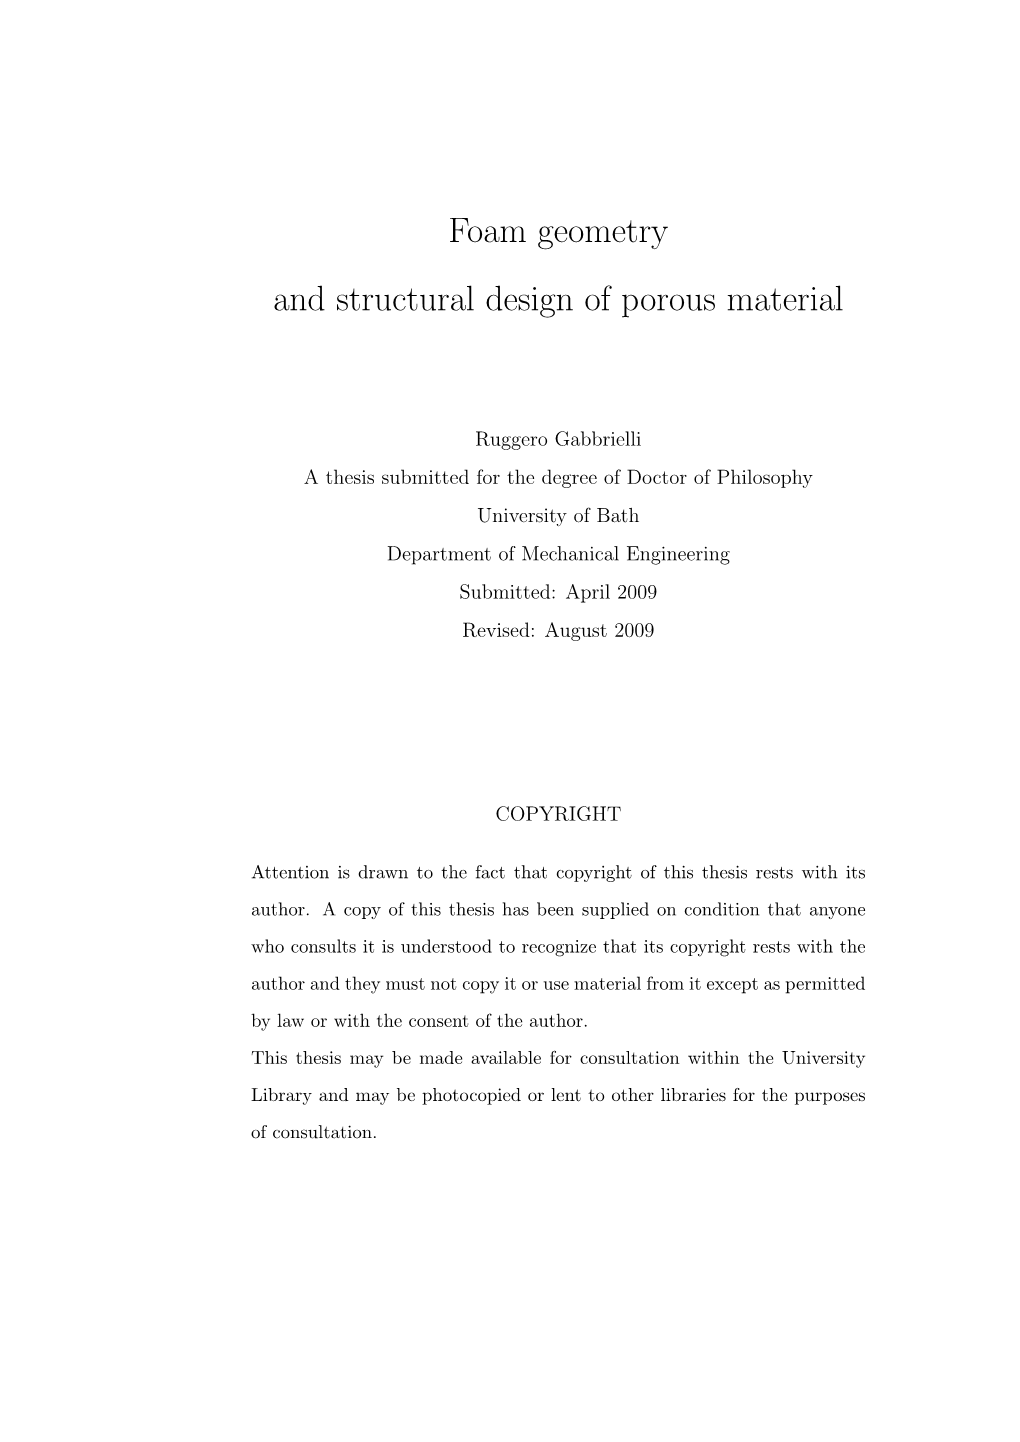 Foam Geometry and Structural Design of Porous Material